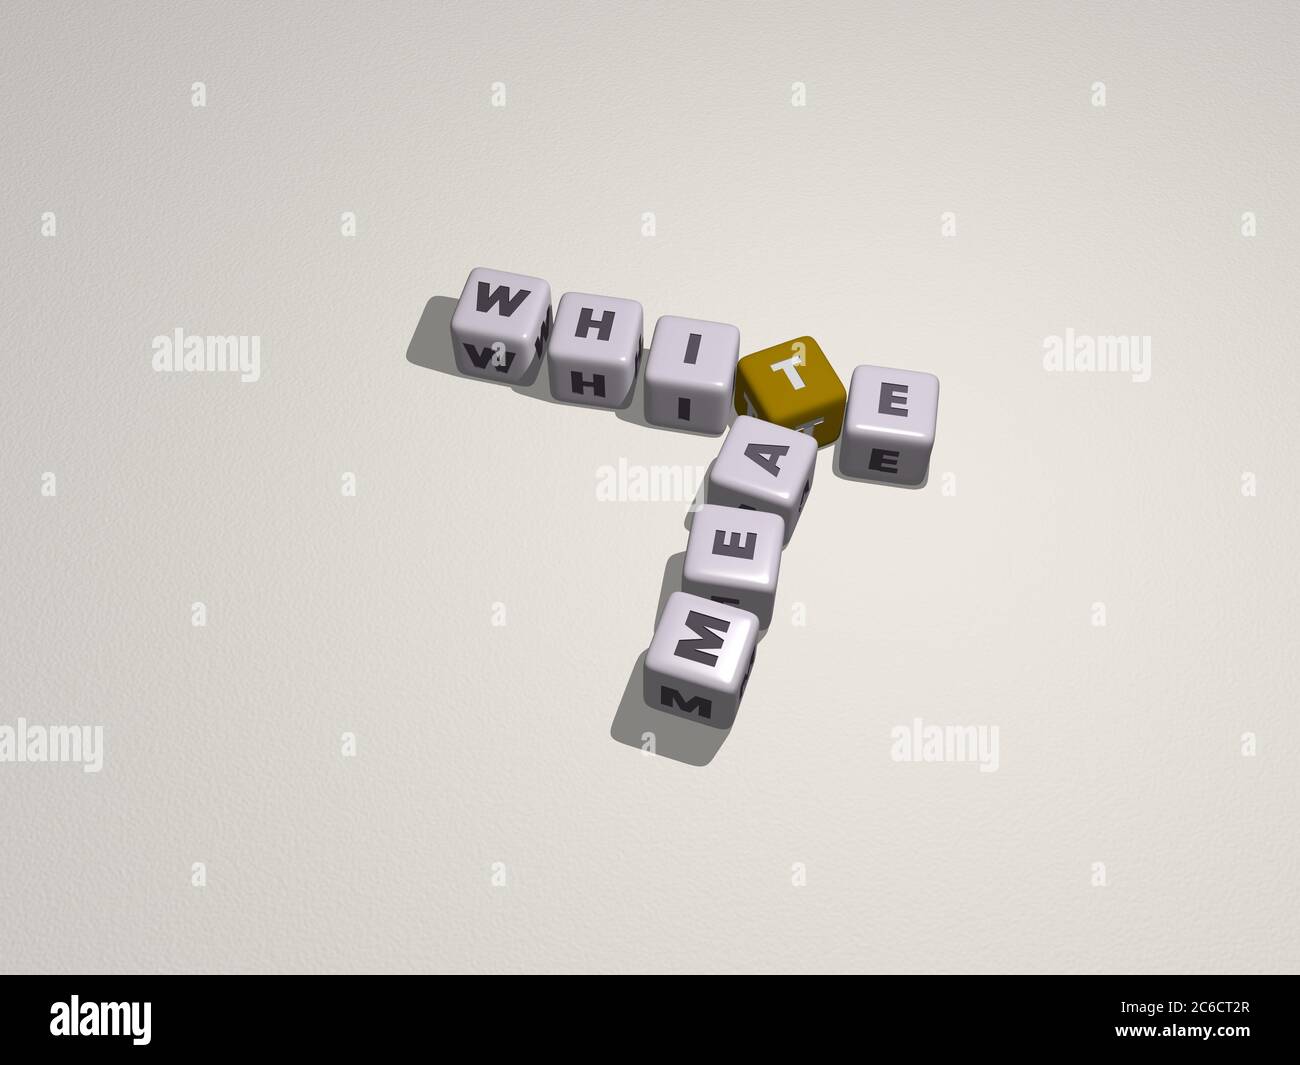 crosswords of Thanksgiving: WHITE MEAT arranged by cubic letters on a mirror floor, concept meaning and presentation. background and illustration. 3D illustration Stock Photo